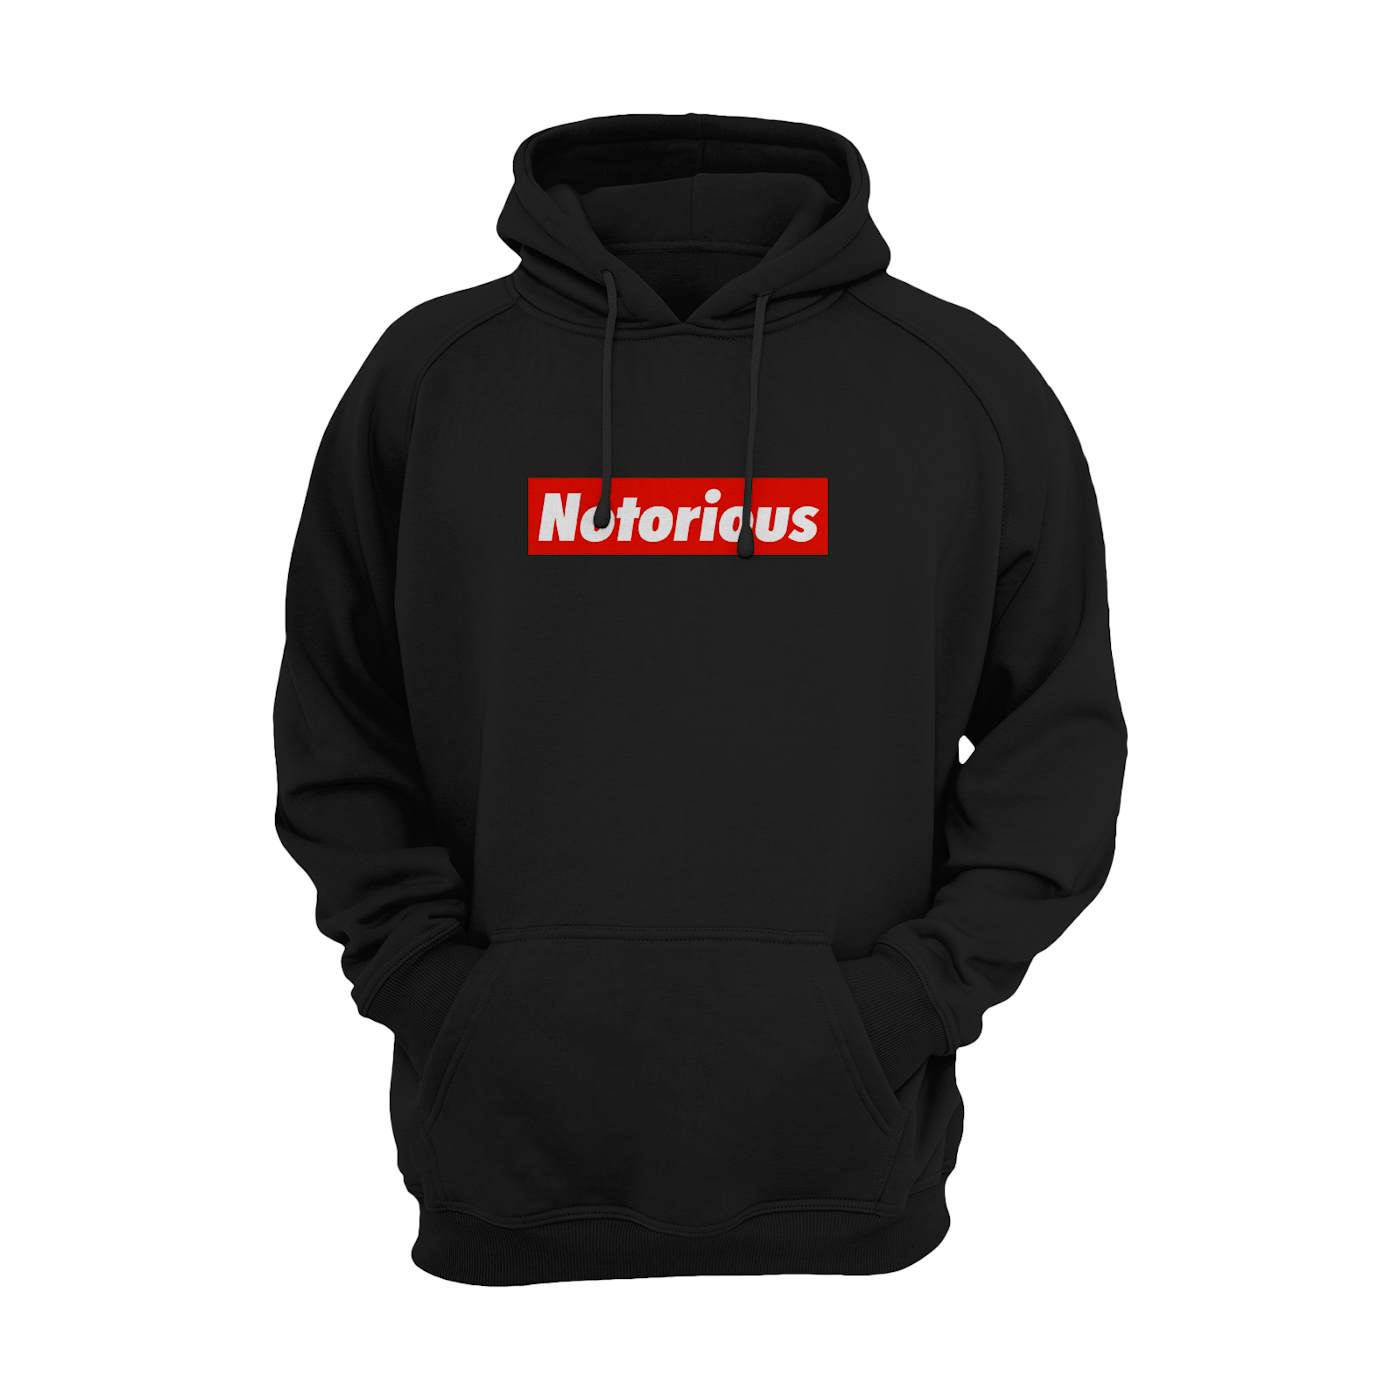 The Notorious B.I.G. Hoodie | Box Logo The Notorious B.I.G. Hoodie